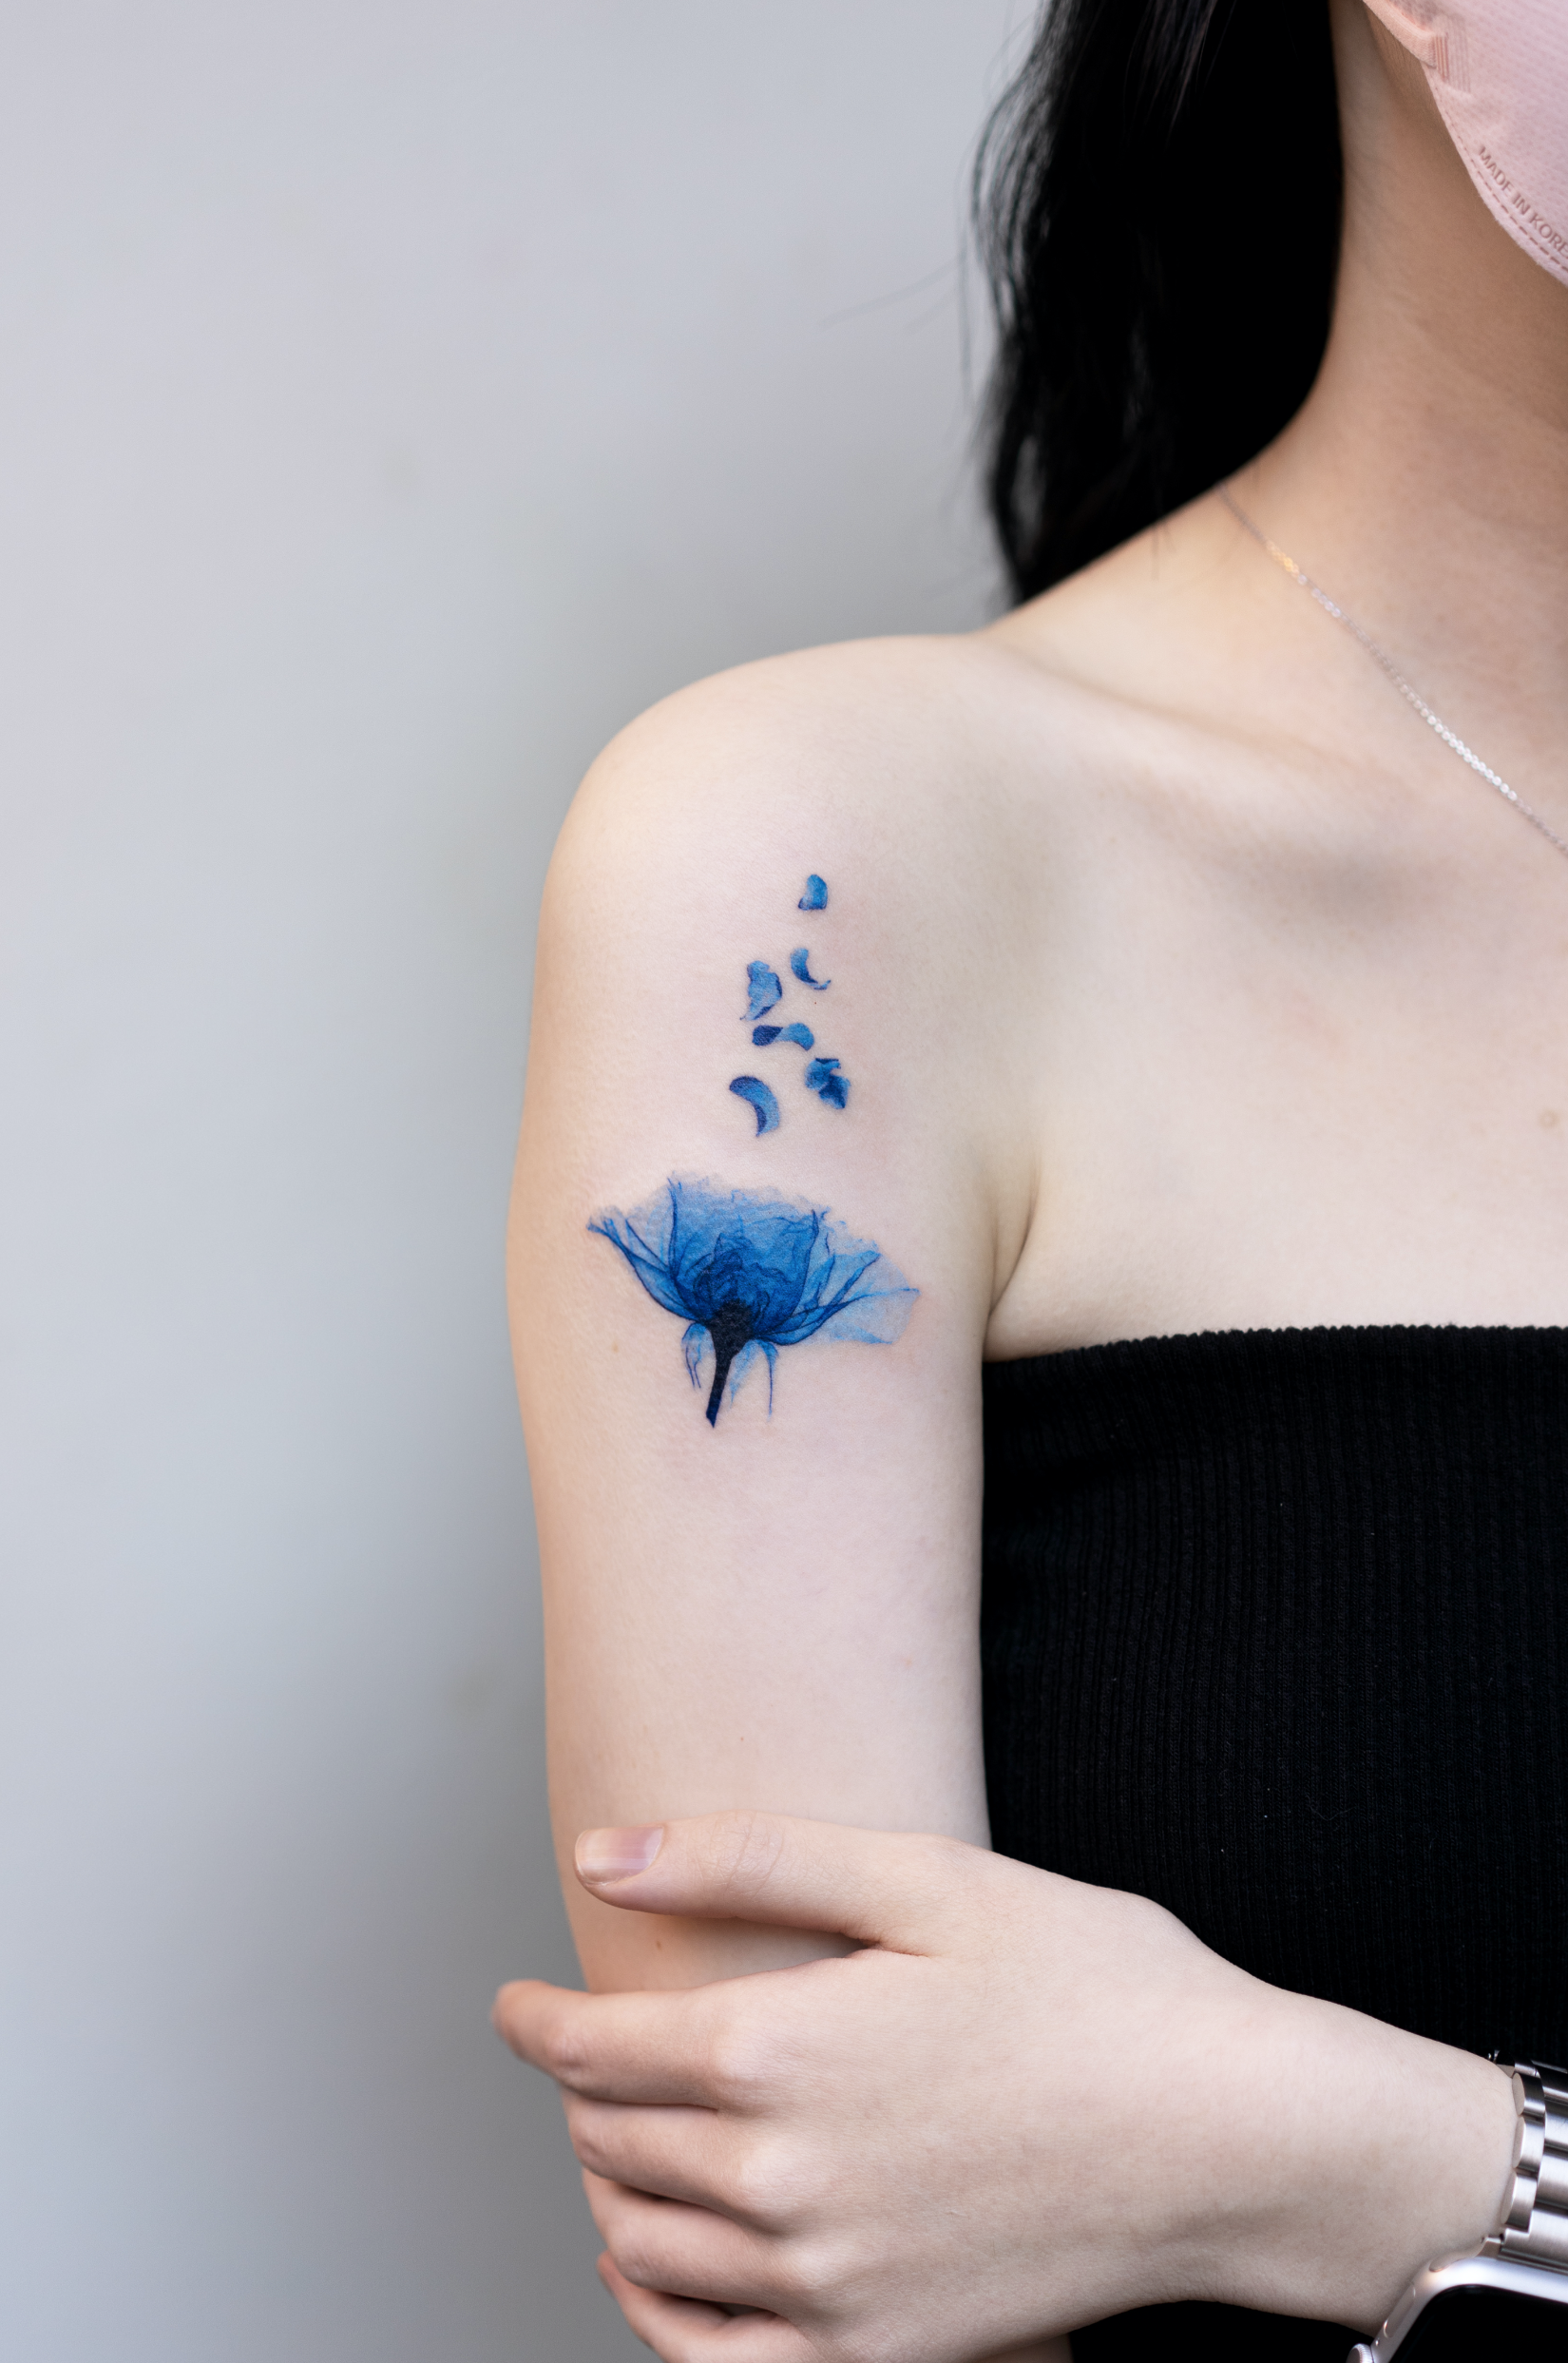 Ethereal Tattoo Designs Are Colored in Blue Ink